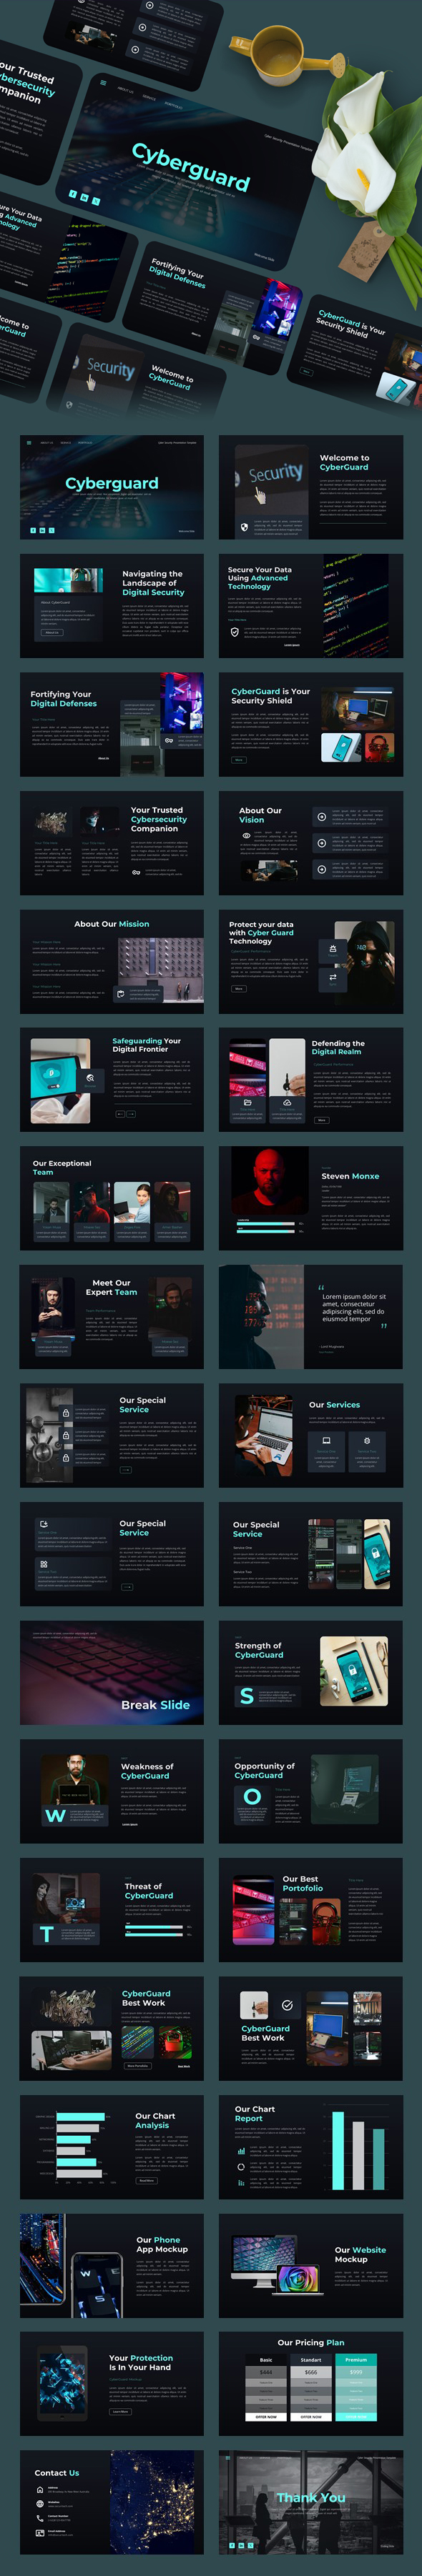 Cyberguard - Cyber Security PowerPoint Template